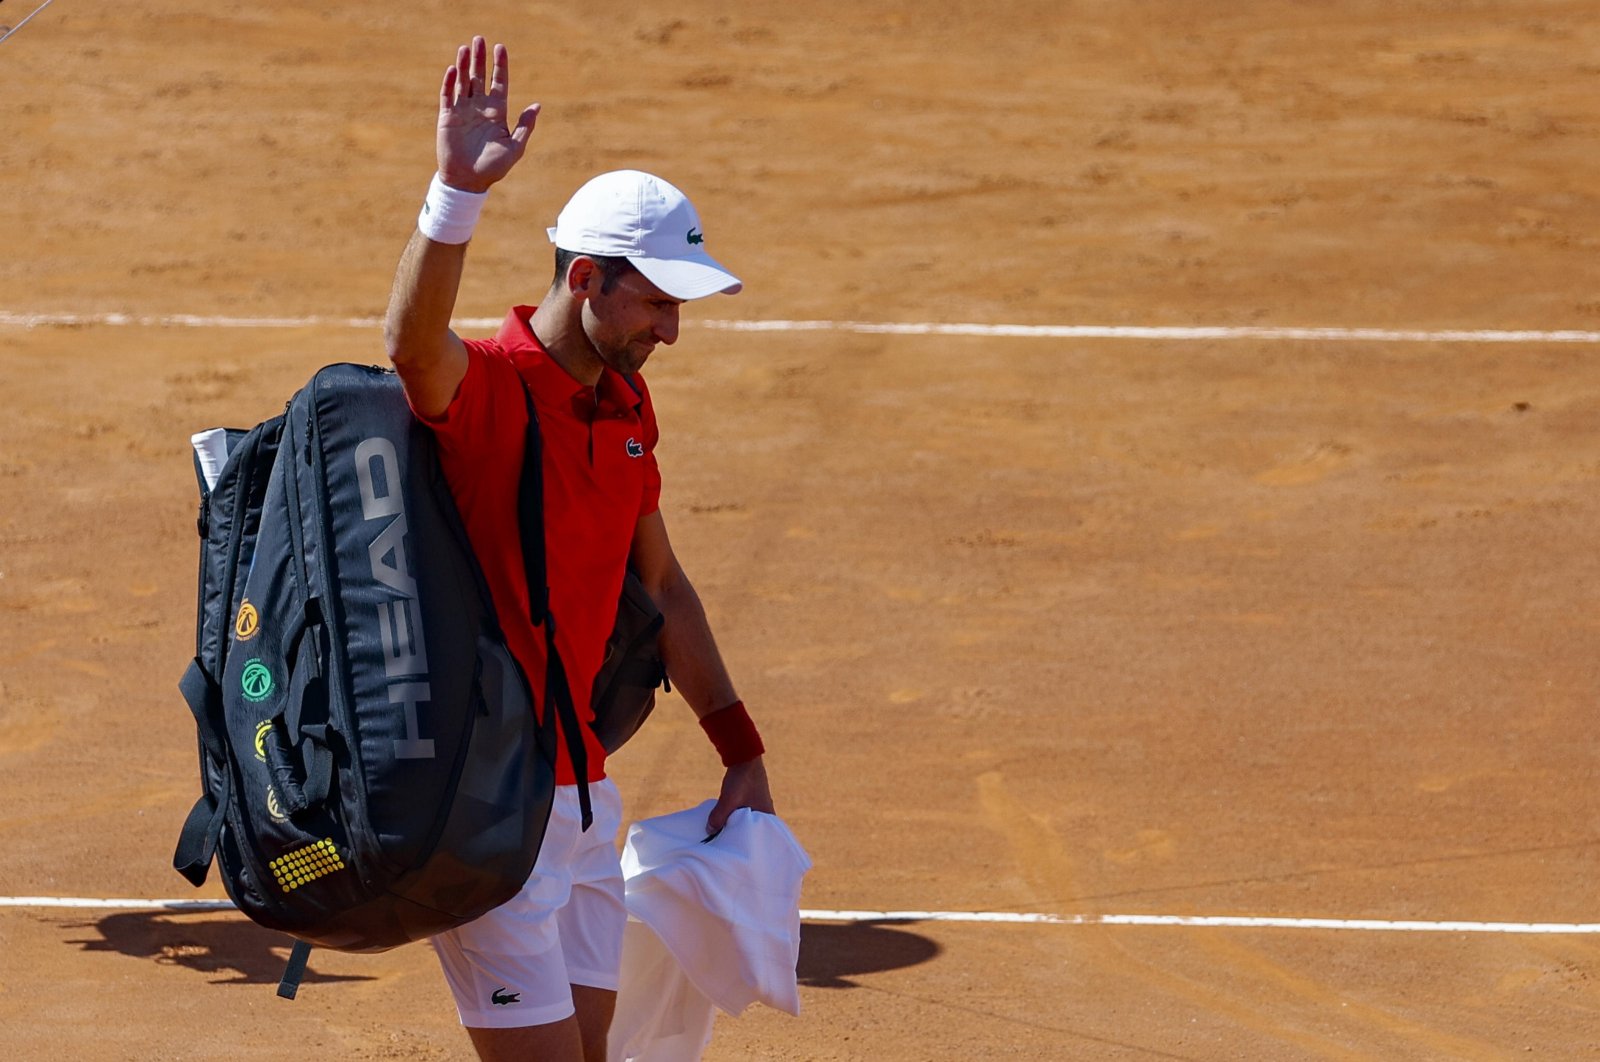 Djokovic’s French Open title defense in doubt after Italian mishap